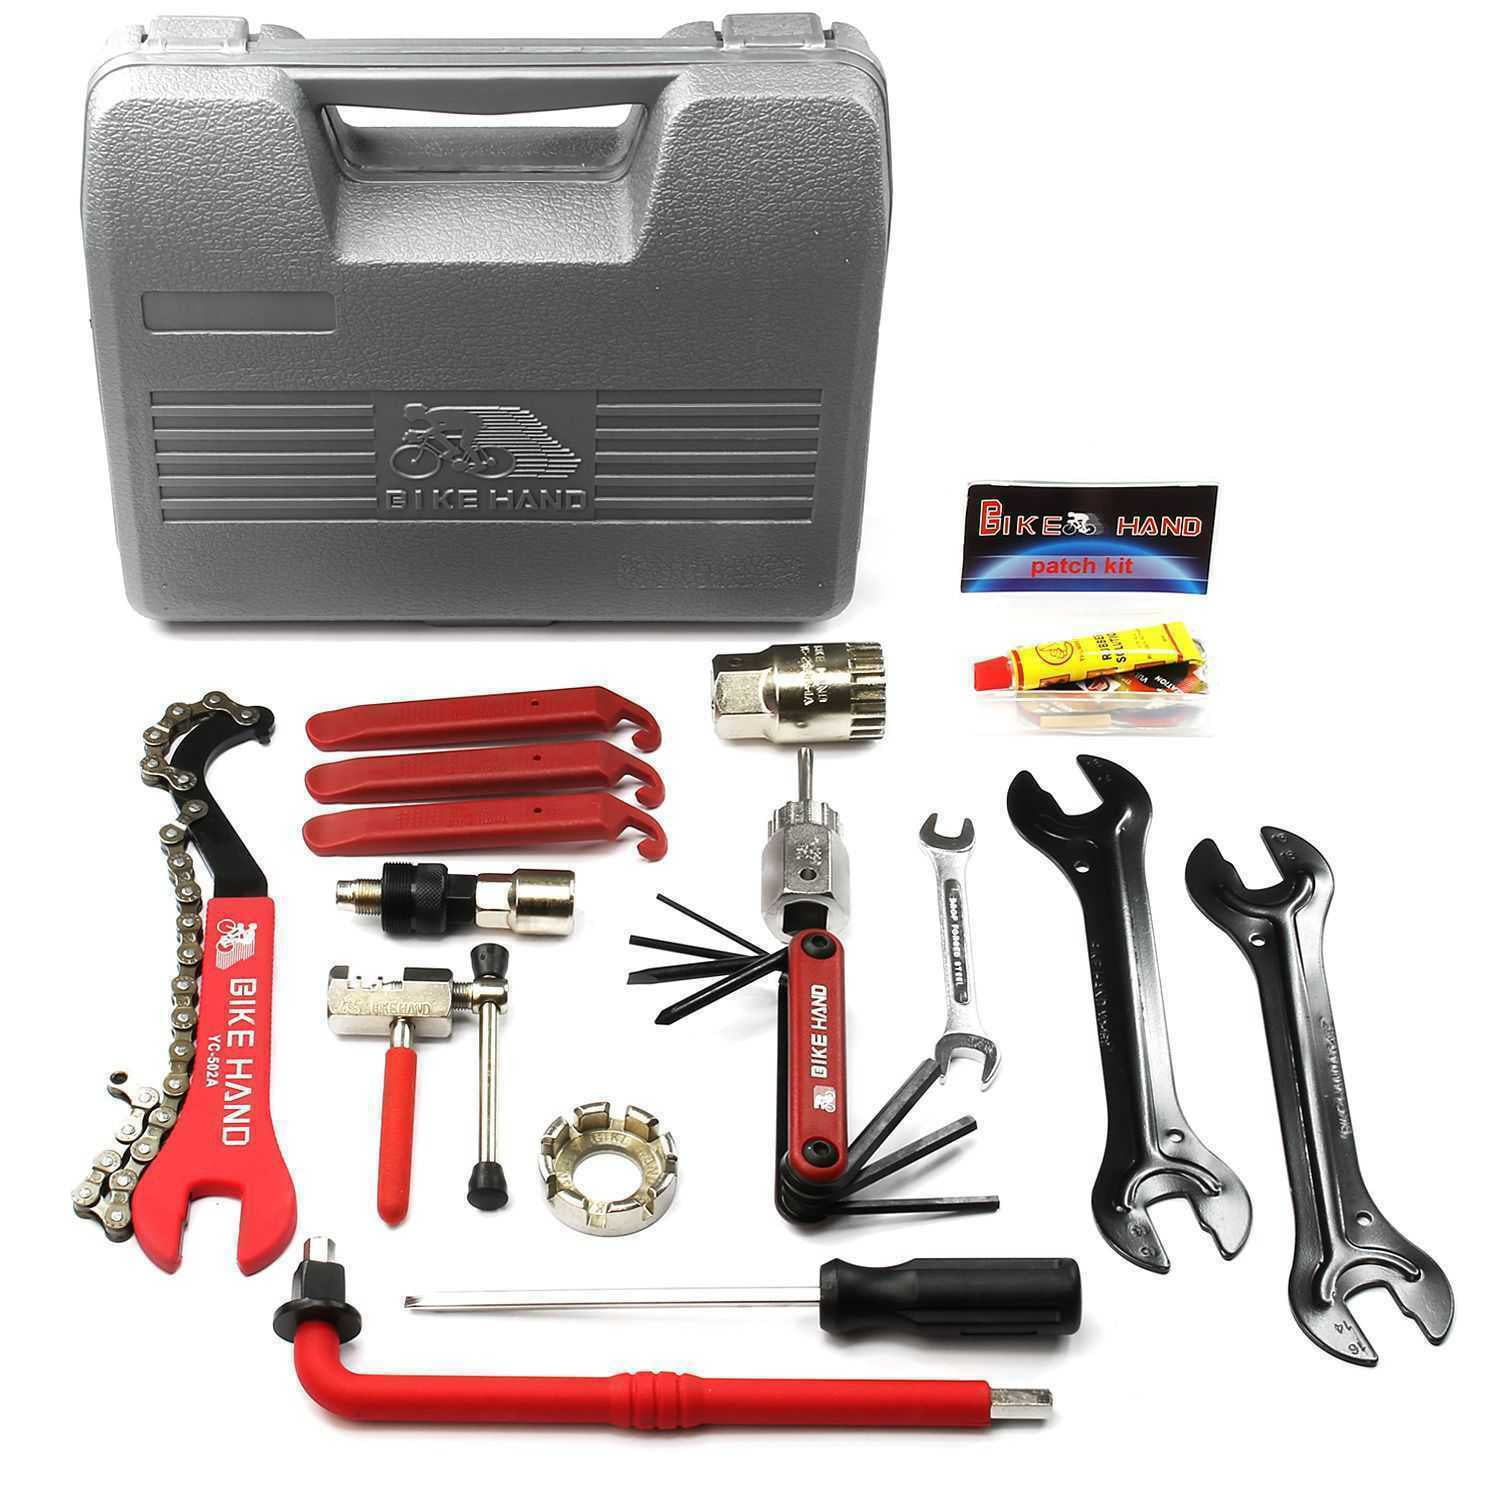 Bike Repair Tools Set Kit Multifunctional with Box for All Bike Types,Bicycle Repair Tool Kit,Easy to carry. 44pcs Bicycle Maintenance Tools Professional 